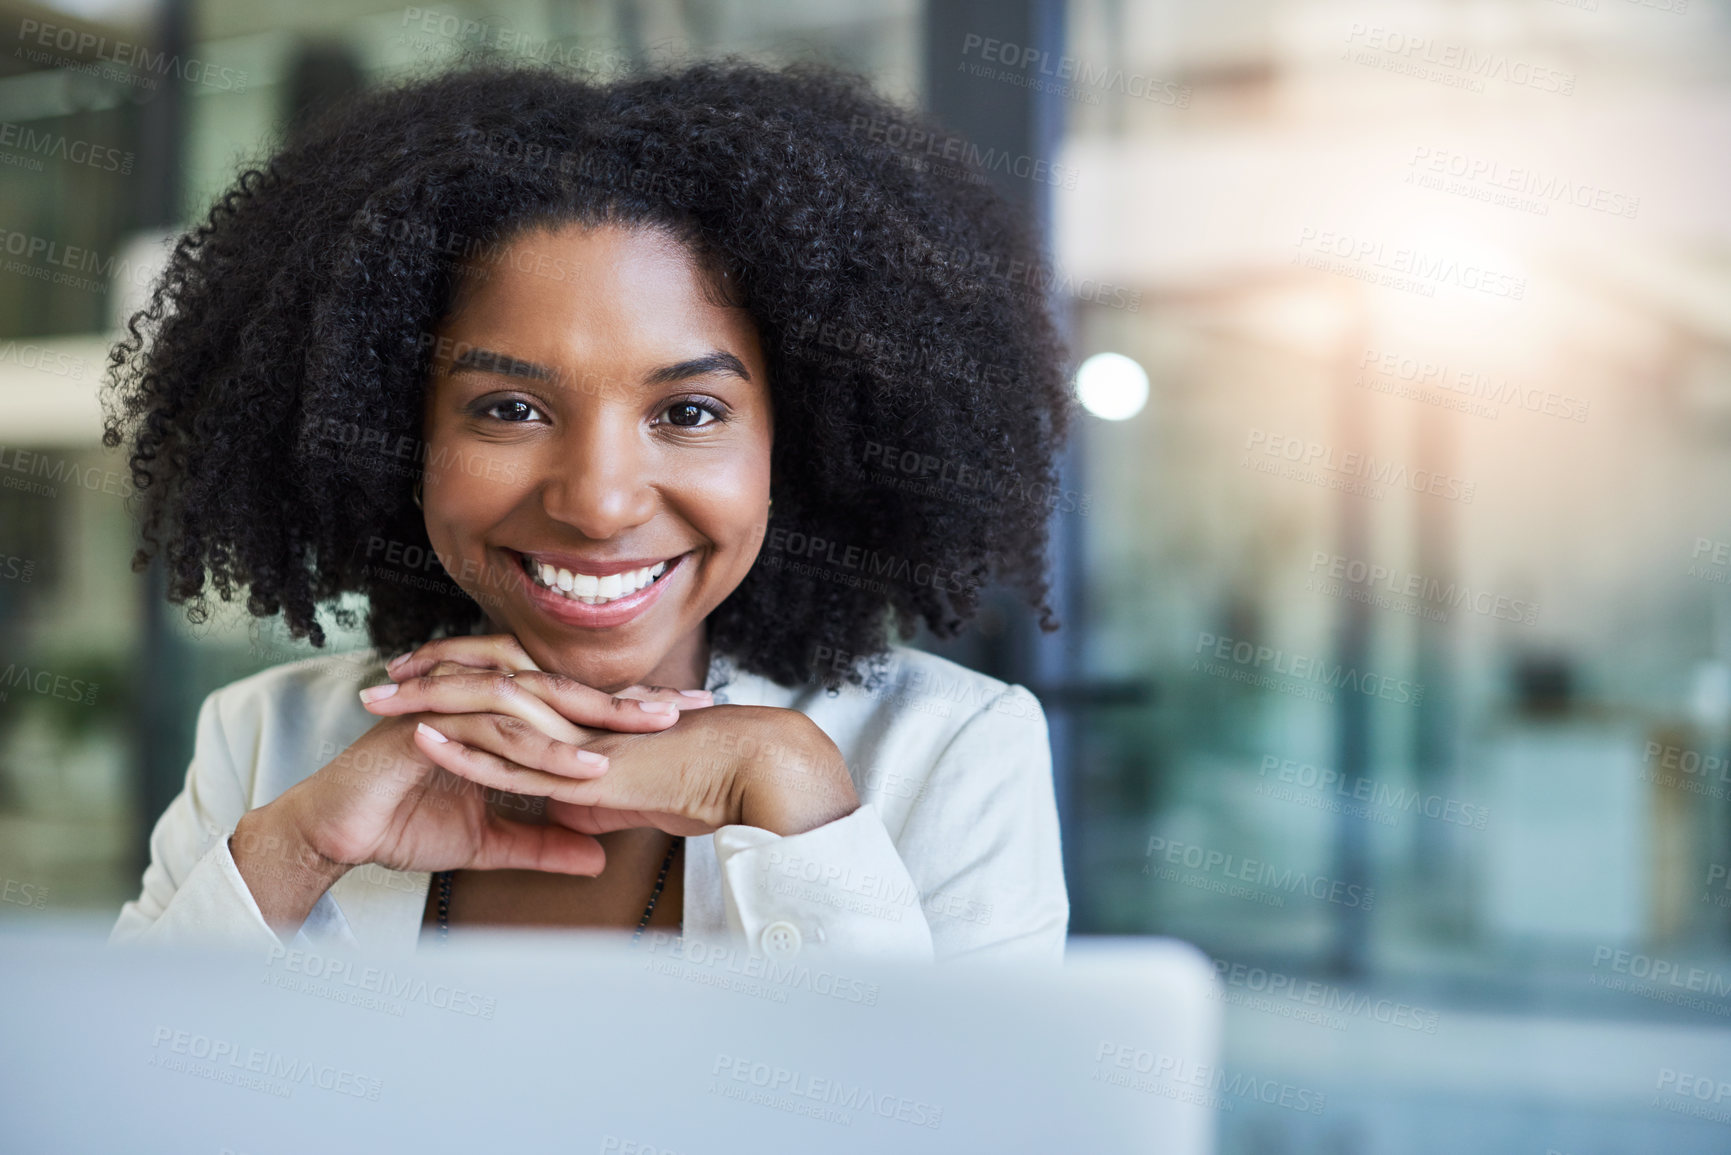 Buy stock photo Portrait of a young businesswoman smiling and in good spirits at her office desk